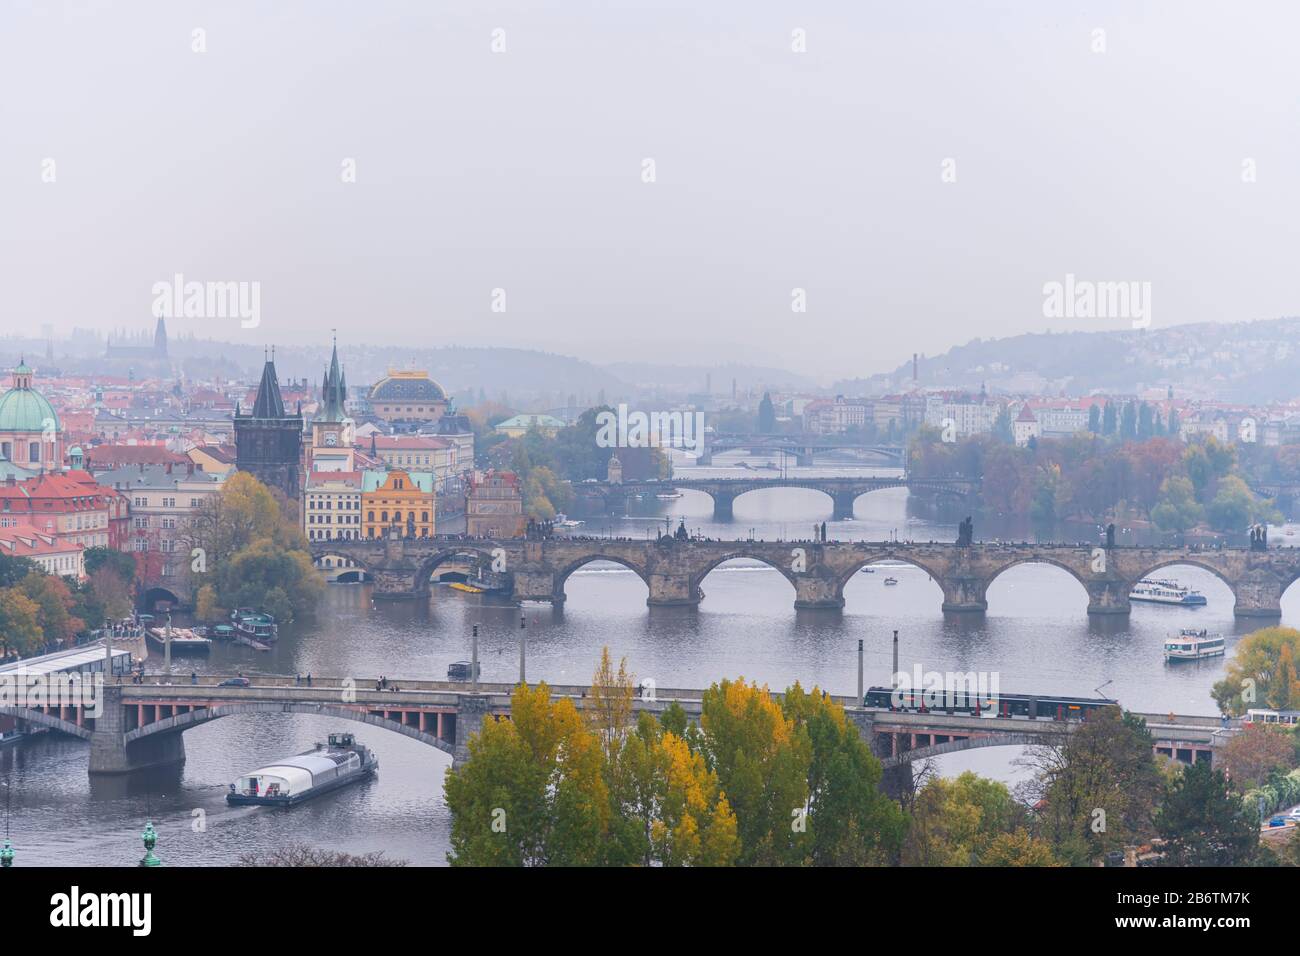 Skyline view with historic Charles Bridge or Karluv Most and Vltava river, Prague, Czech Republic Stock Photo